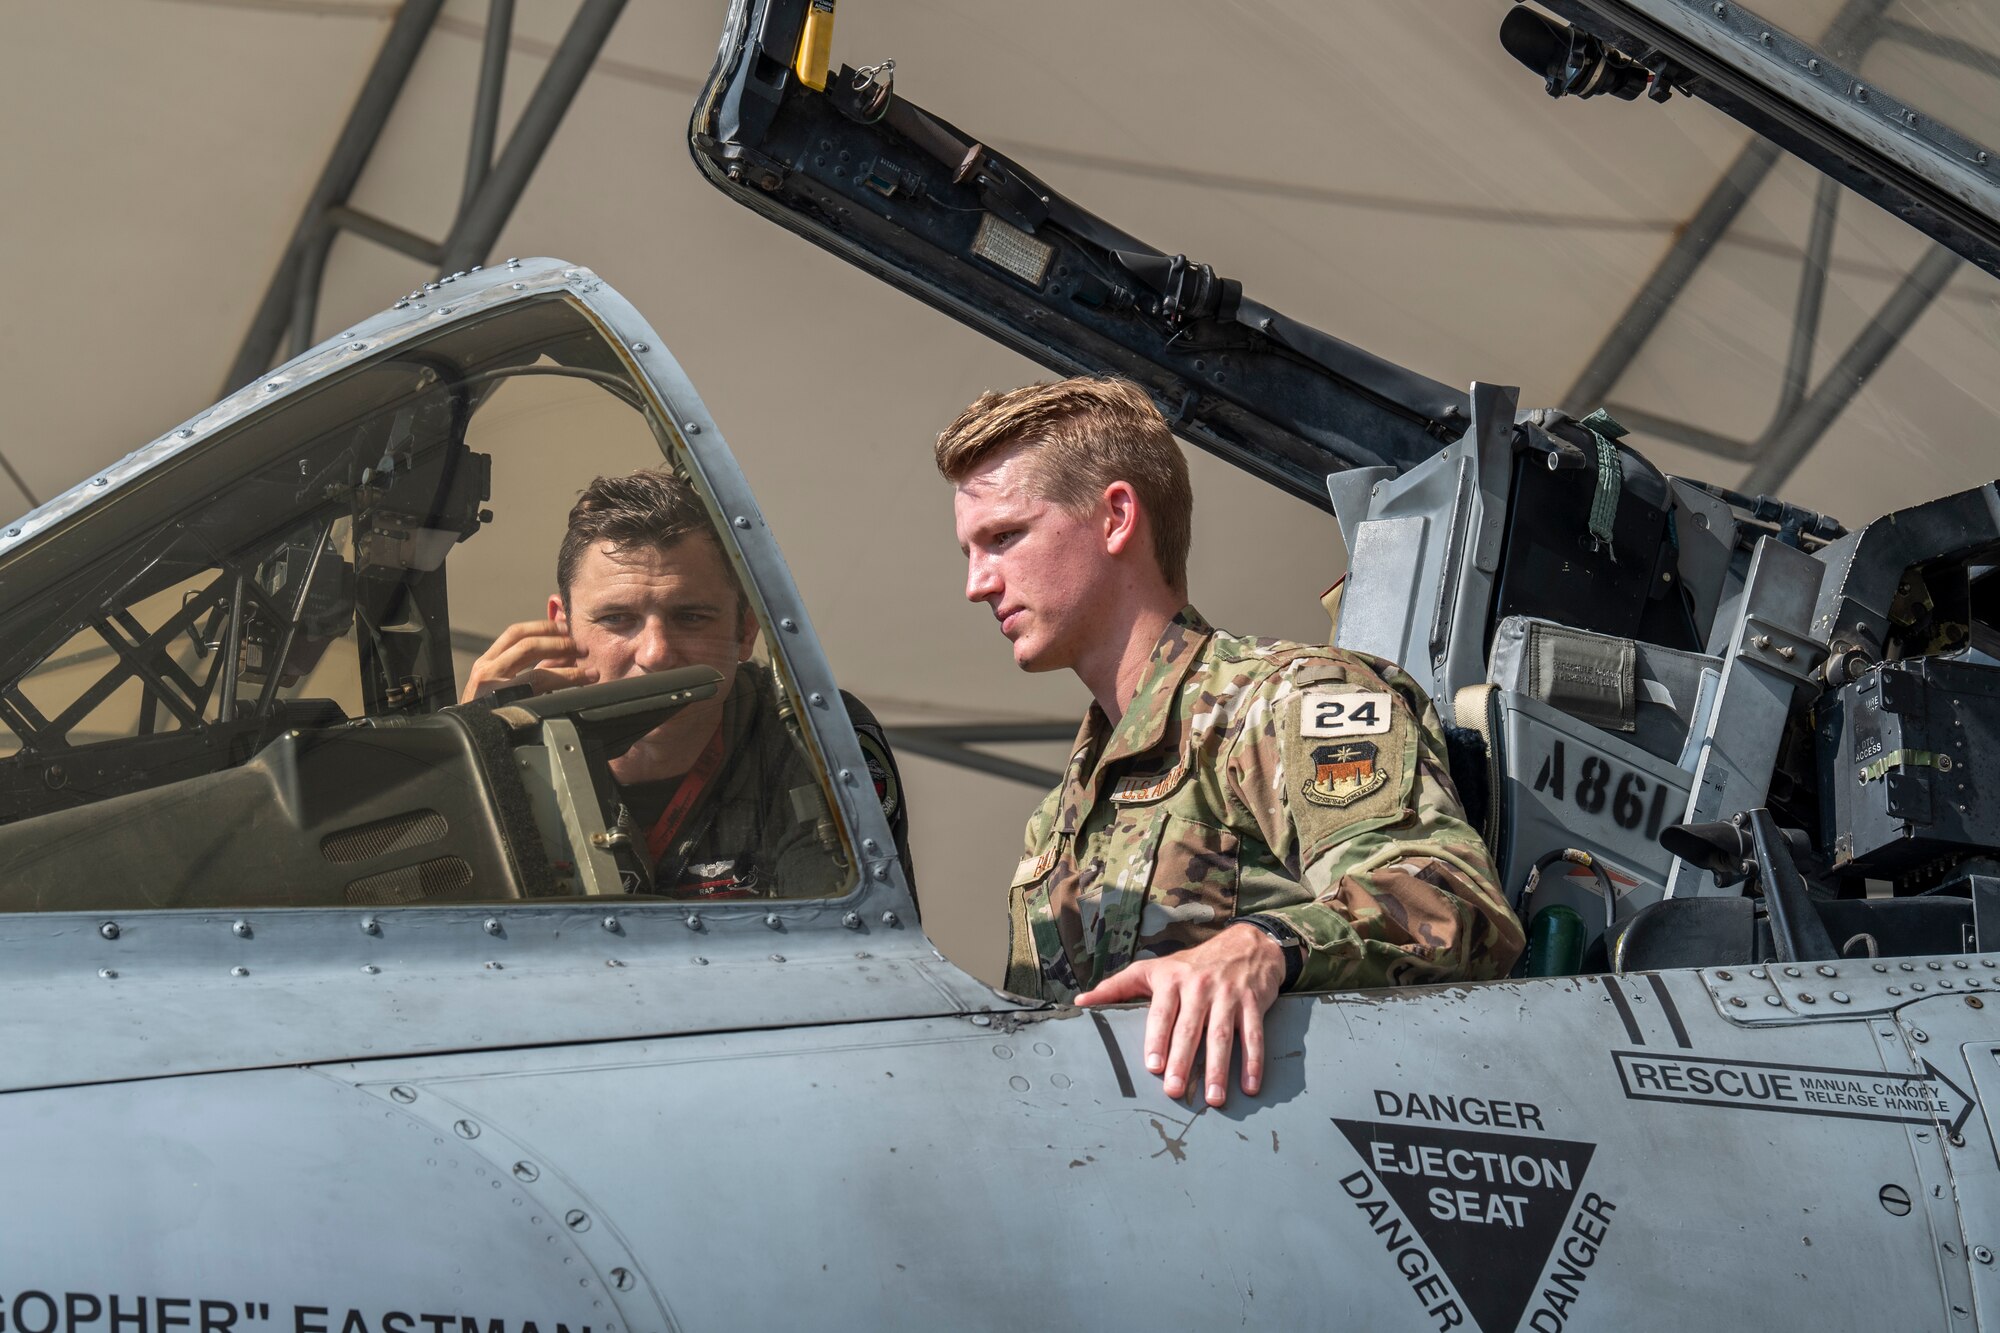 U.S. Air Force Capt. Brandon Bylina, 75th Fighter Squadron A-10C Thunderbolt II pilot, shows U.S Air Force Academy Cadet 2nd Class Wesley Bailey the inside of an A-10C Thunderbolt II aircraft at Moody Air Force Base, Georgia, June 24, 2022.